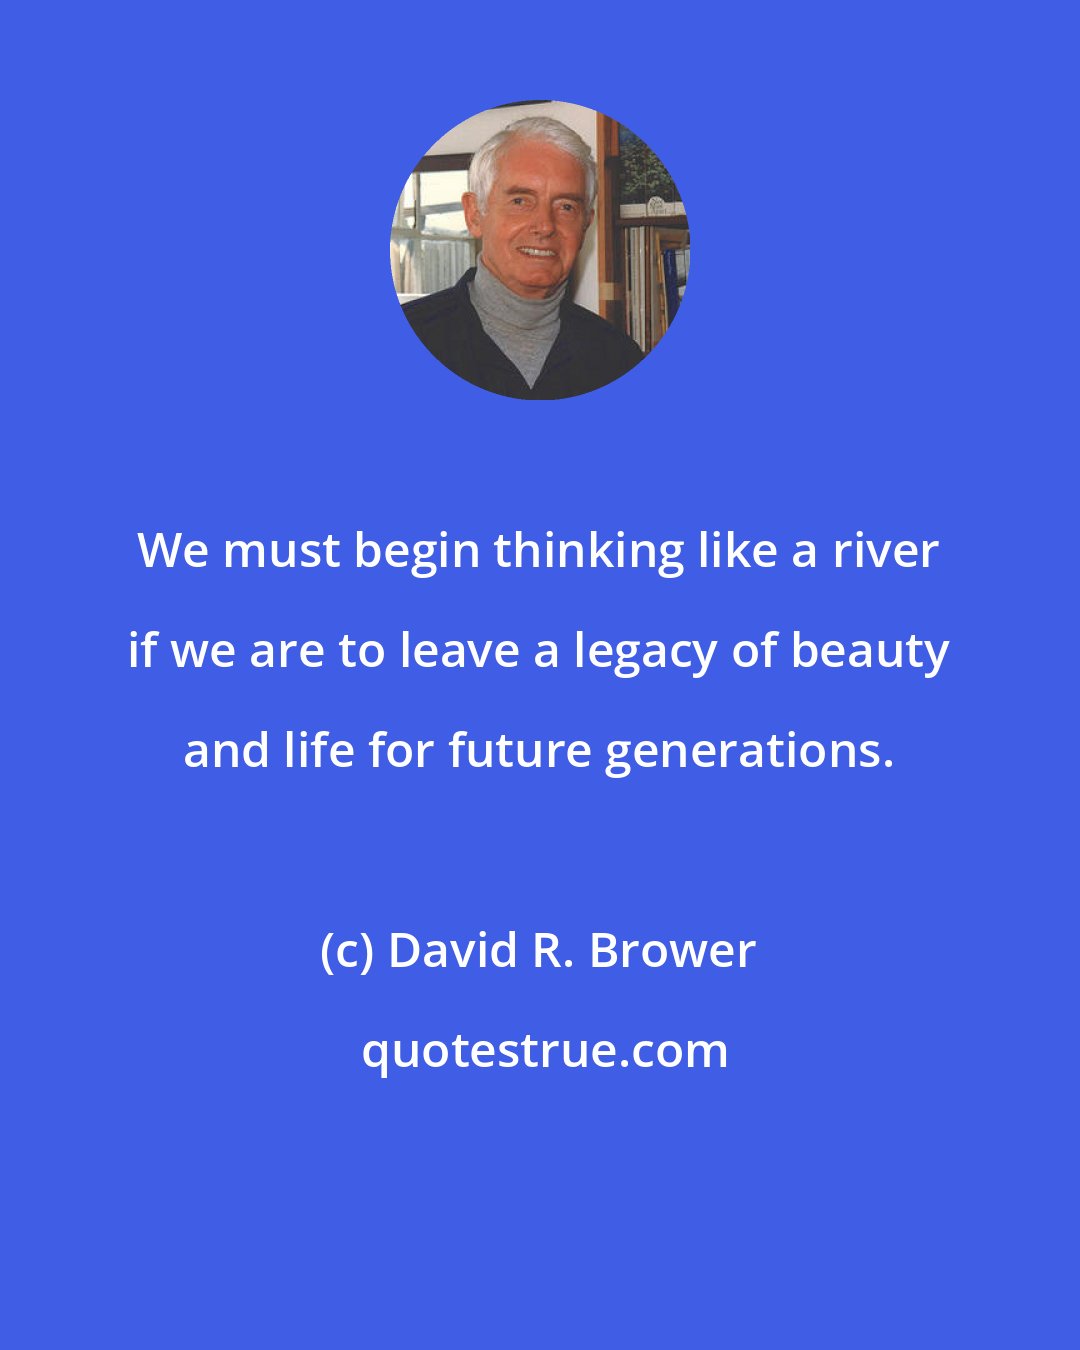 David R. Brower: We must begin thinking like a river if we are to leave a legacy of beauty and life for future generations.